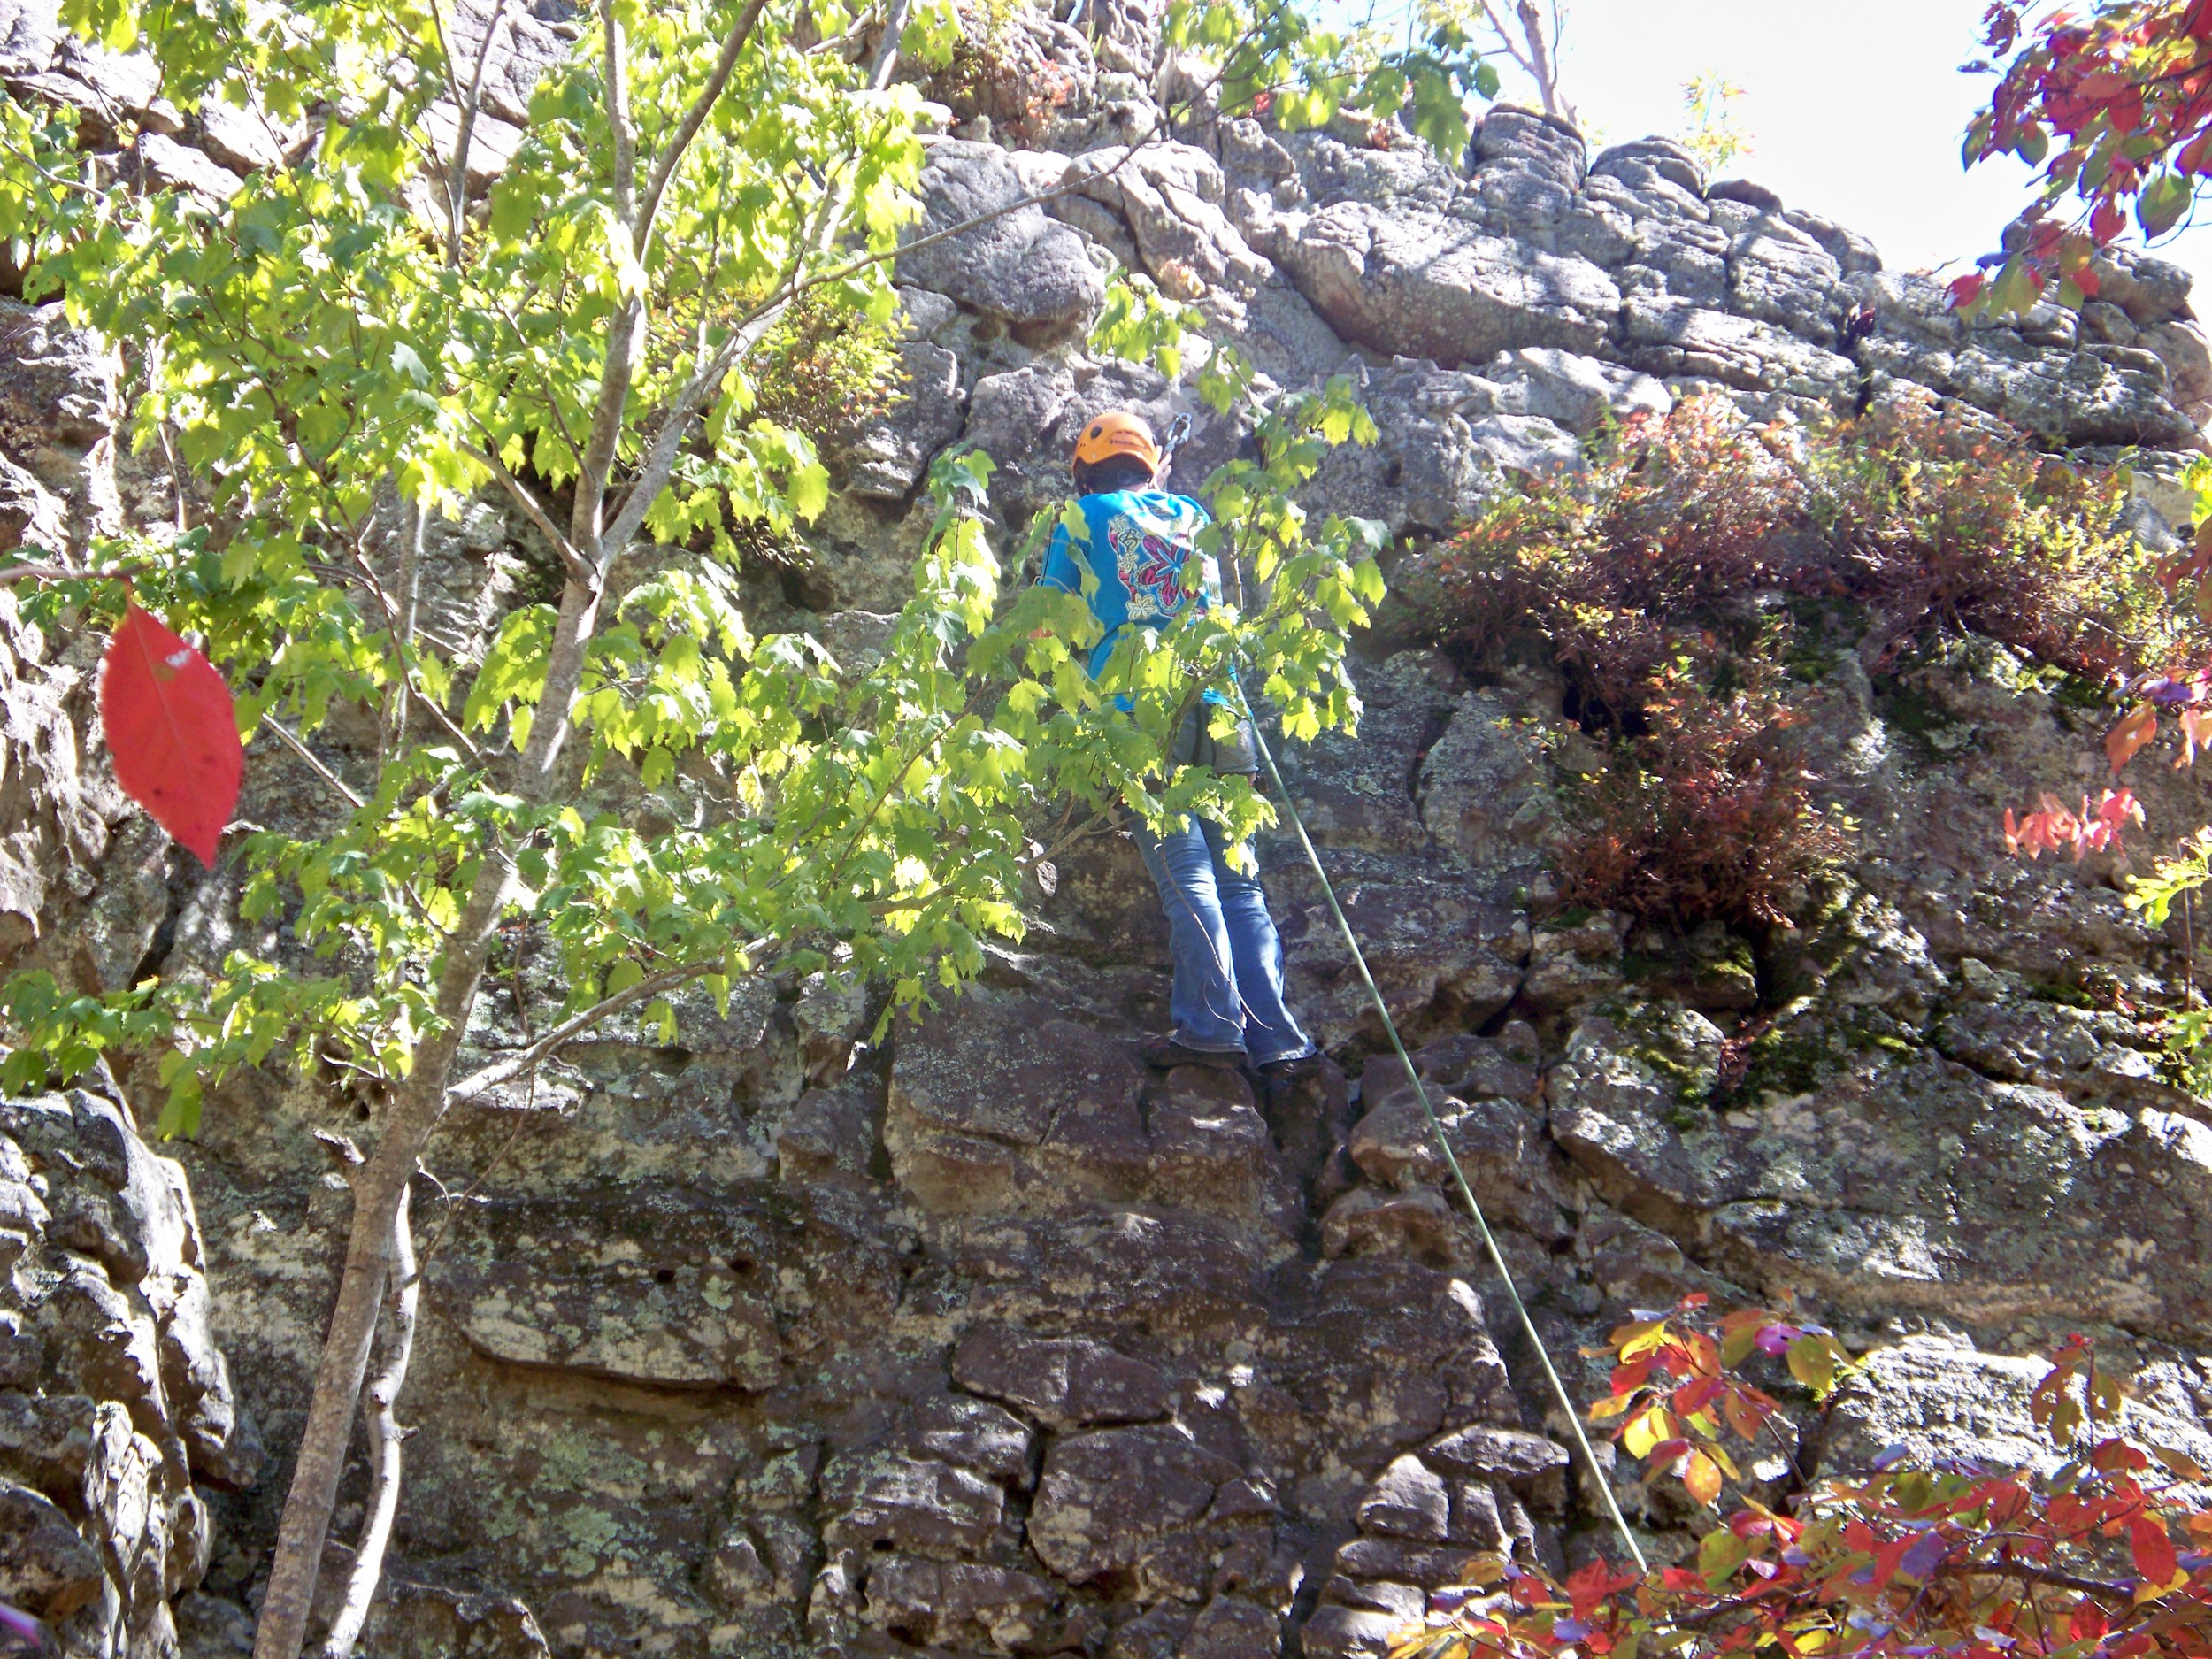 Katie climbing to the treetops on the bluffs